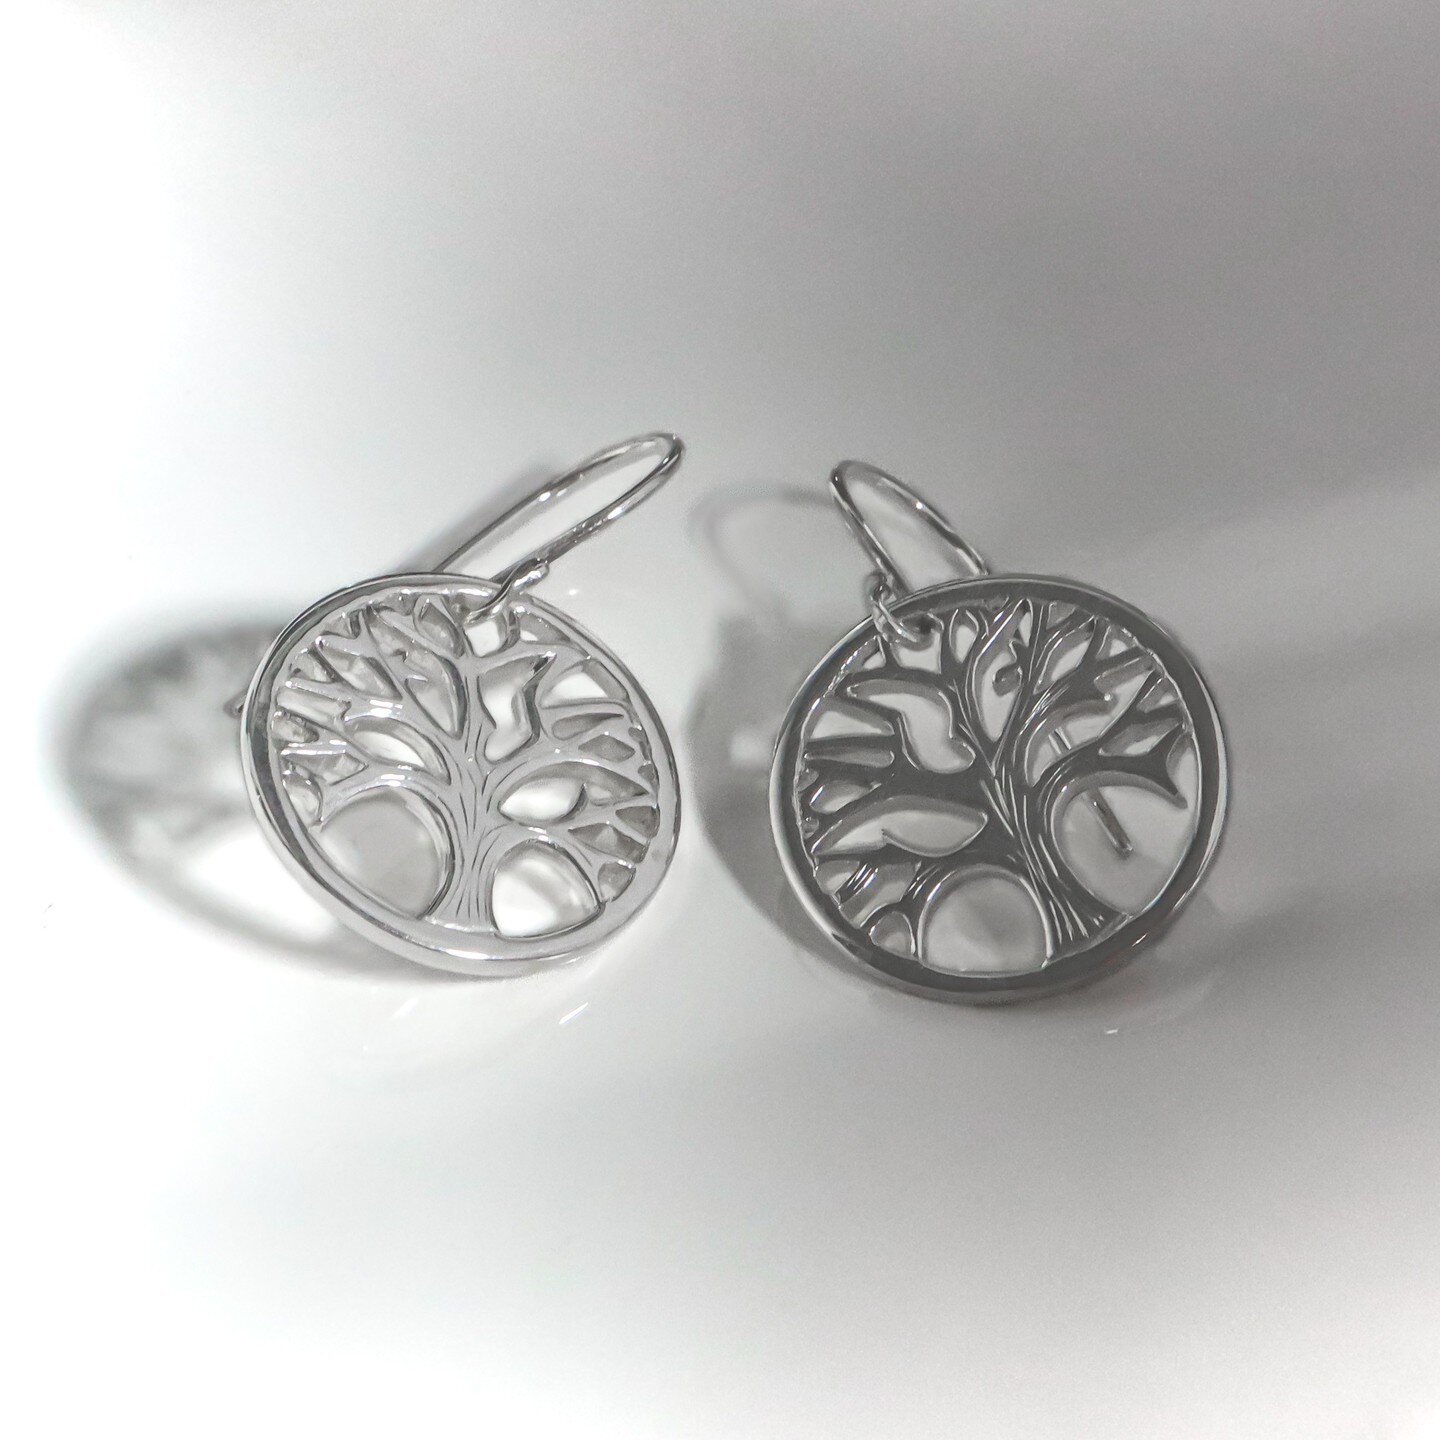 I got to bring out my very tiniest sawblades for these tree of life earrings for a work friend (I may have broken a few!) They're about the size of a penny and hung from handmade ear wires.  Everything made from recycled sterling eco-silver.